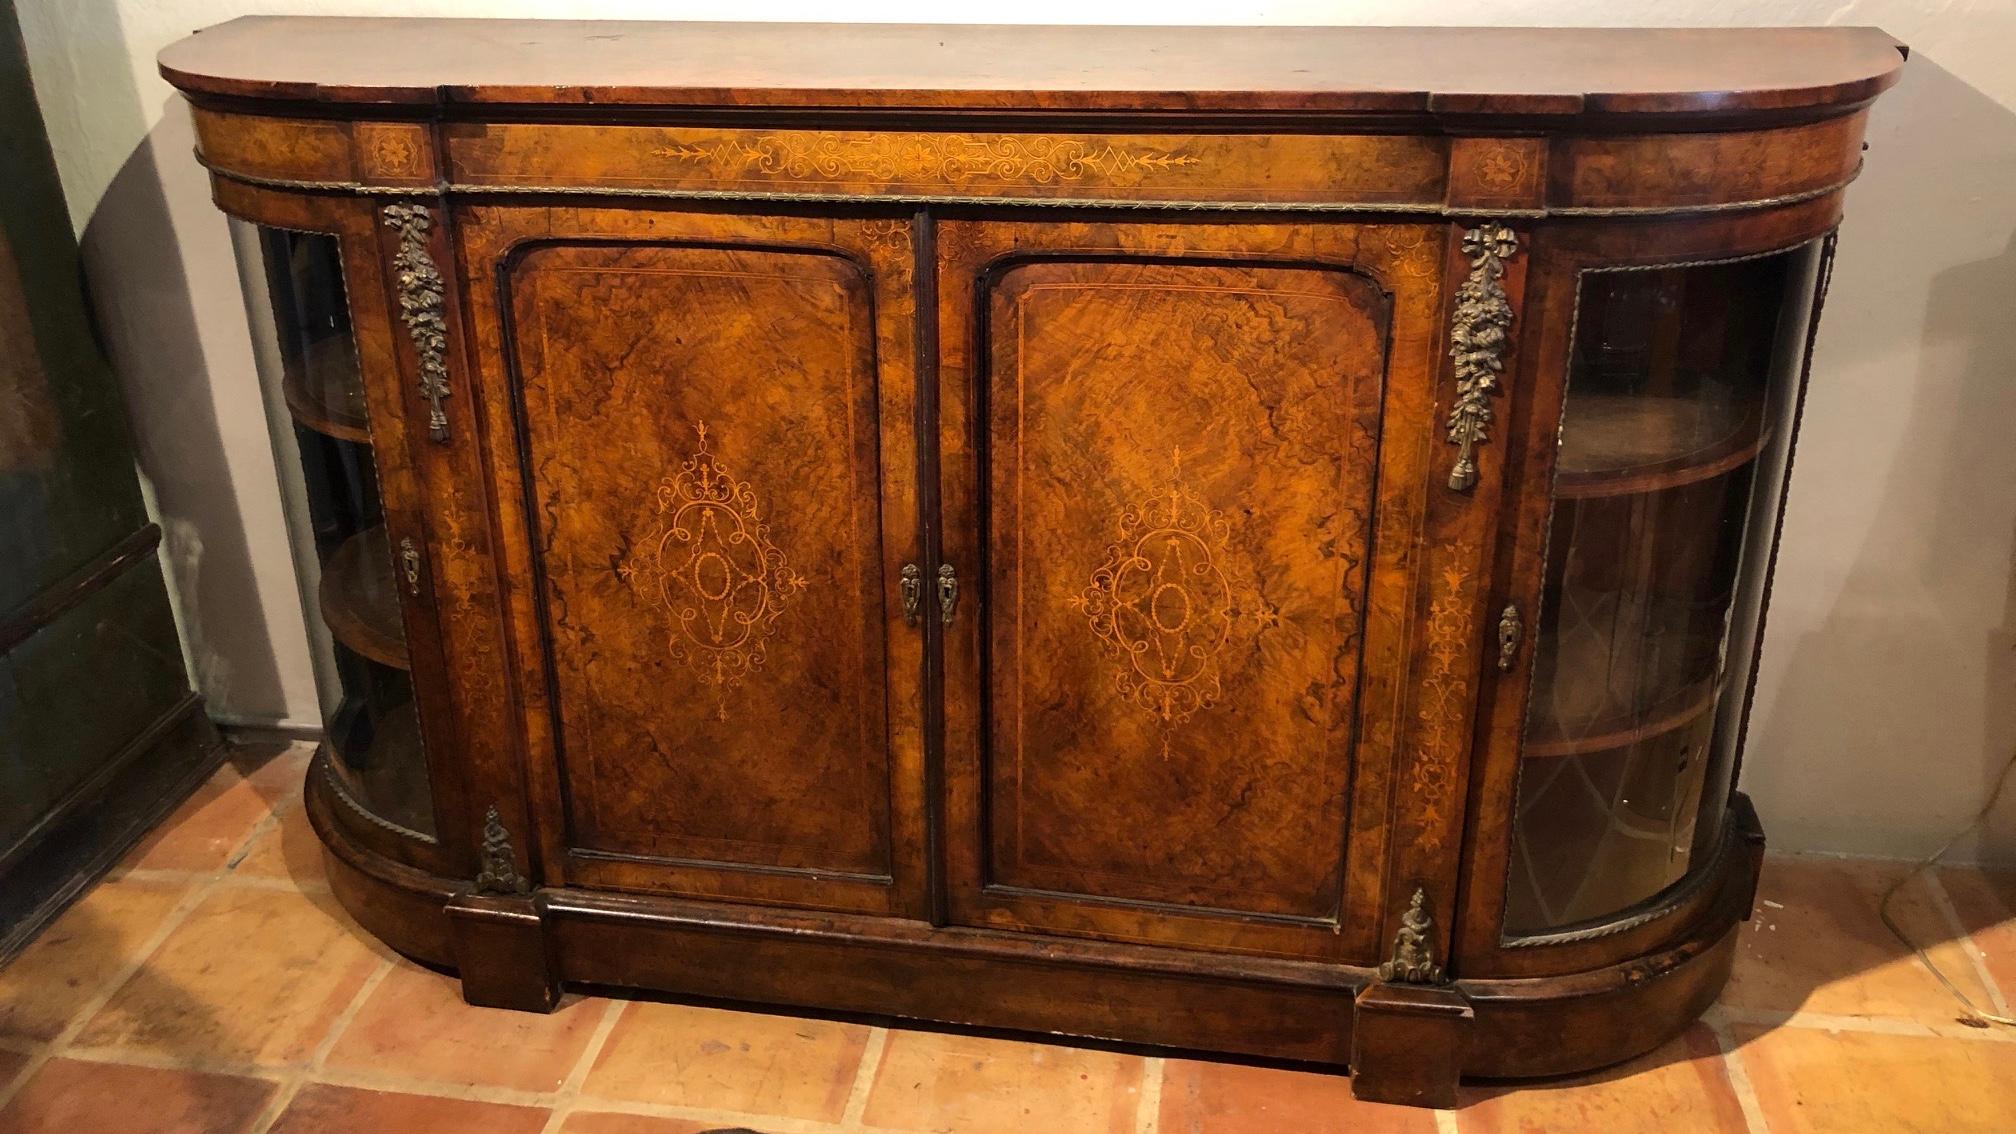 This is a superb traditional mid-19th century. Burr walnut English inlaid and ormolu-mounted credenza
Great quality original patina This credenza is designed with 4 doors.
Its attention to detail and lavish decoration are certain to draw the